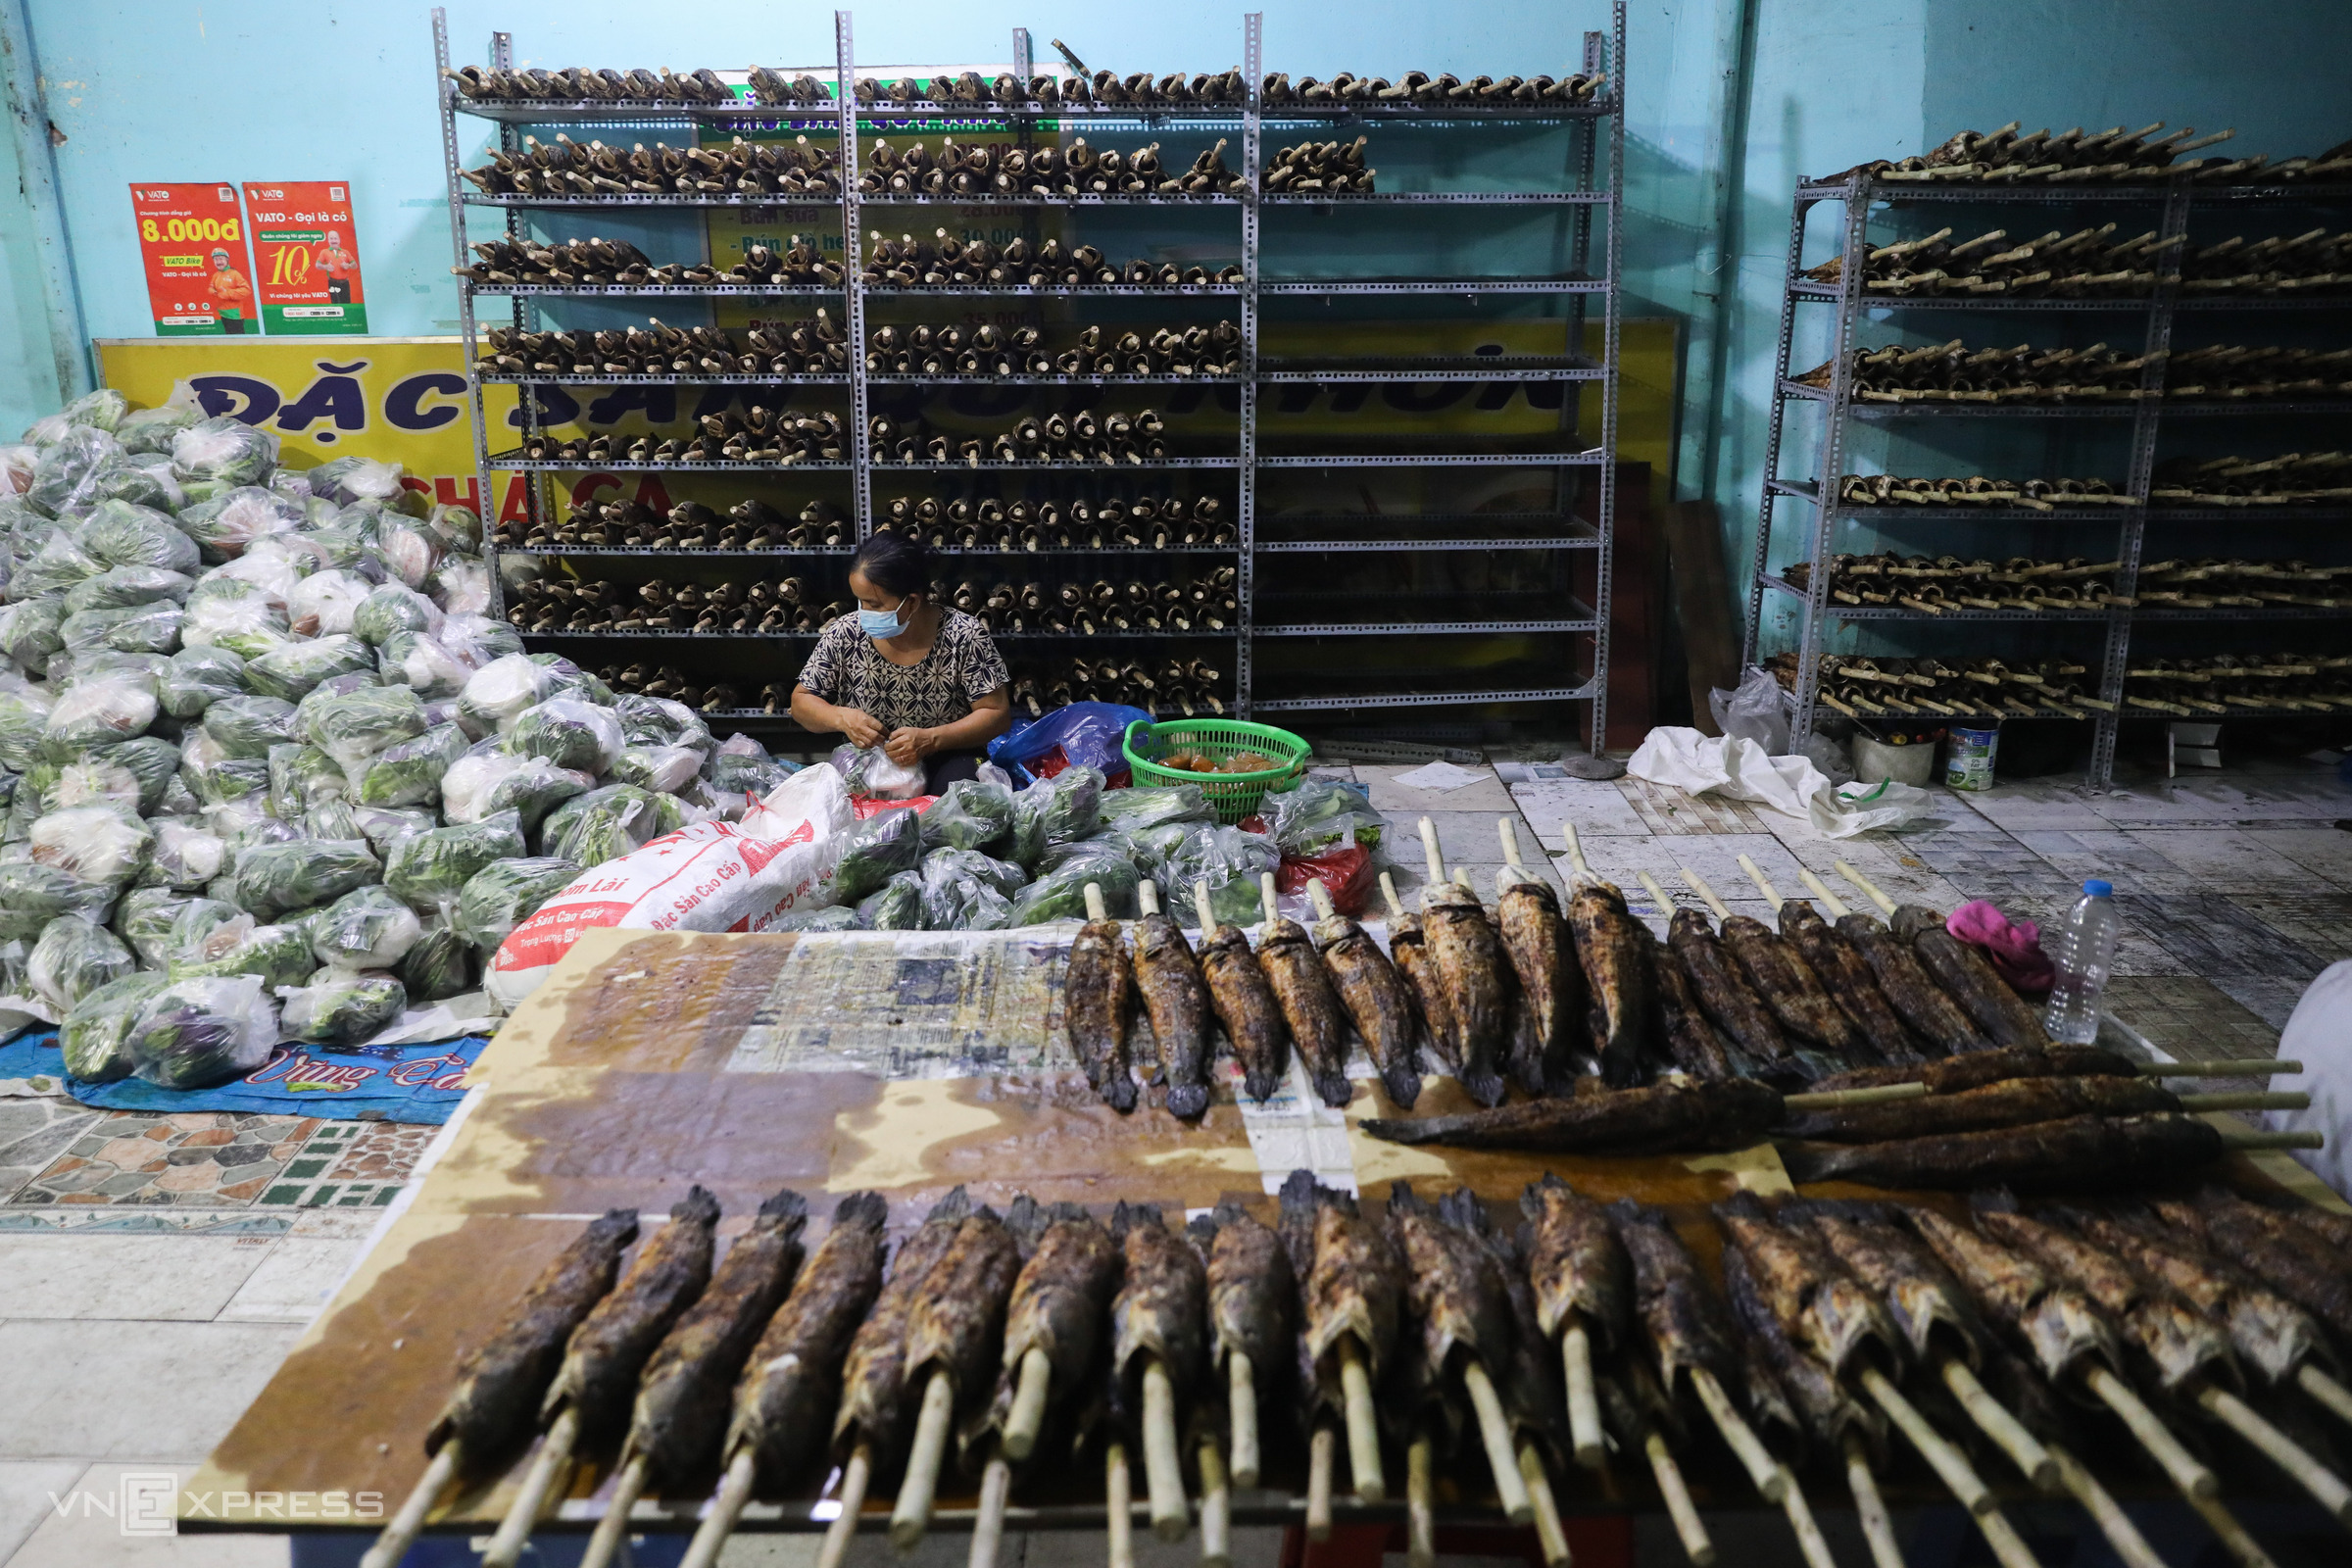 Thousands of grilled snakehead fish are neatly arranged on the shelves inside Trungs stall. Employees are hard at work pre-processing fish, preparing vegetables and making sauce. Normally, the shop only has a few employees, but on this occasion, the owner said he mobilized nearly 30 staff.